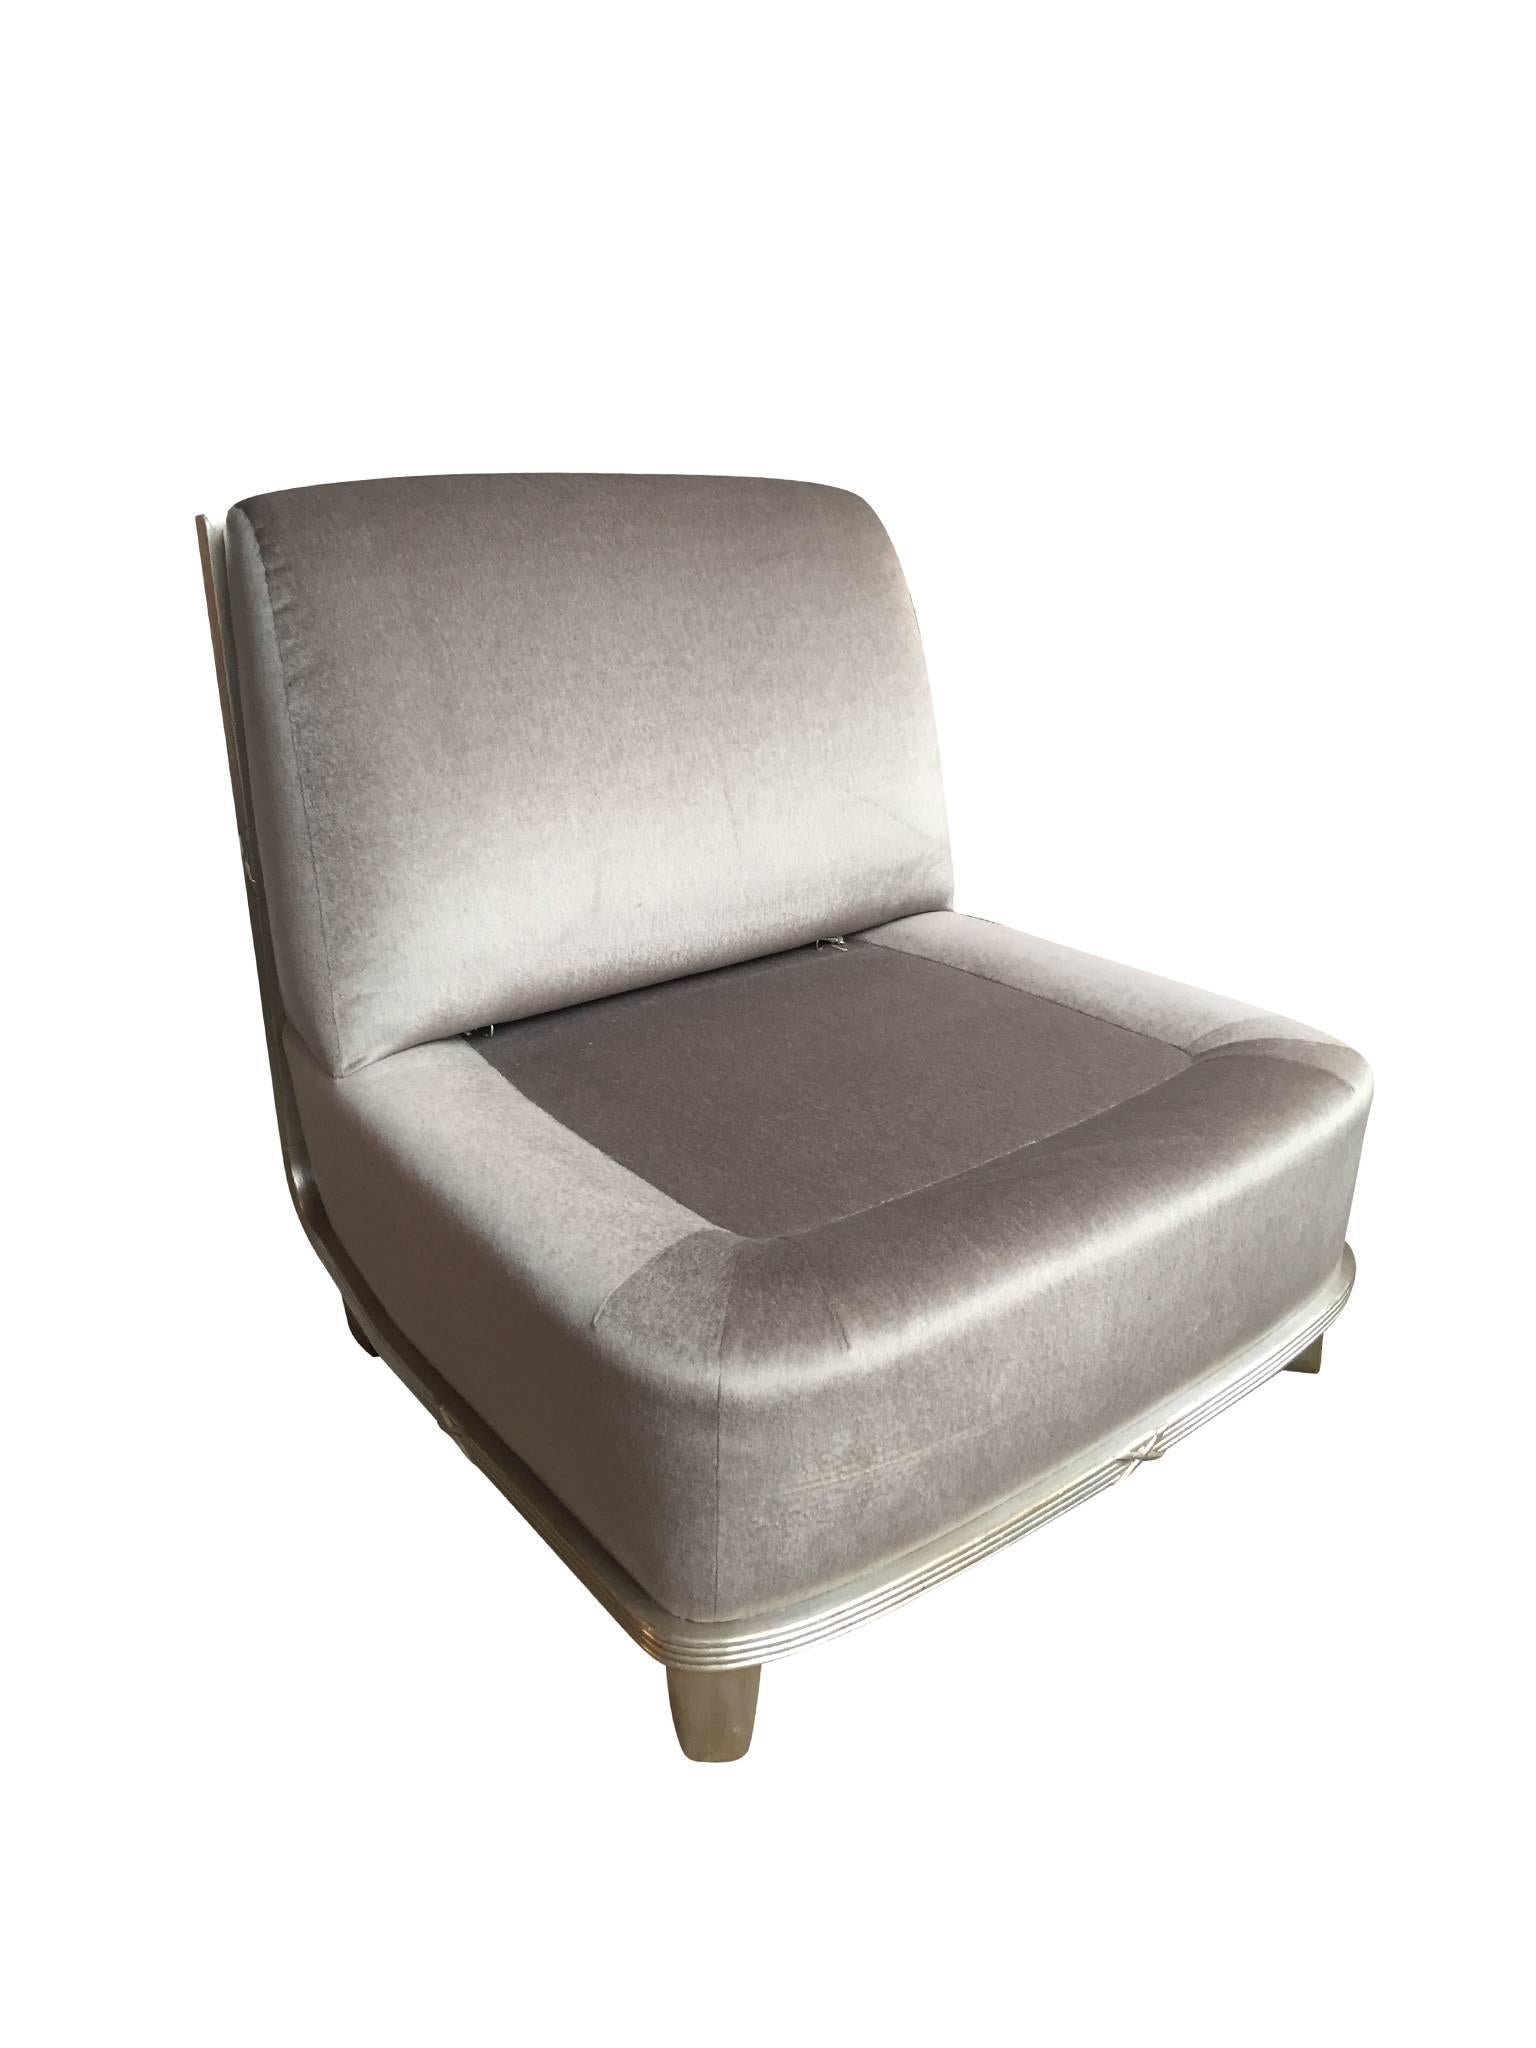 20th Century 1960s Silver Mohair Lounge Chair in the Style of James Mont